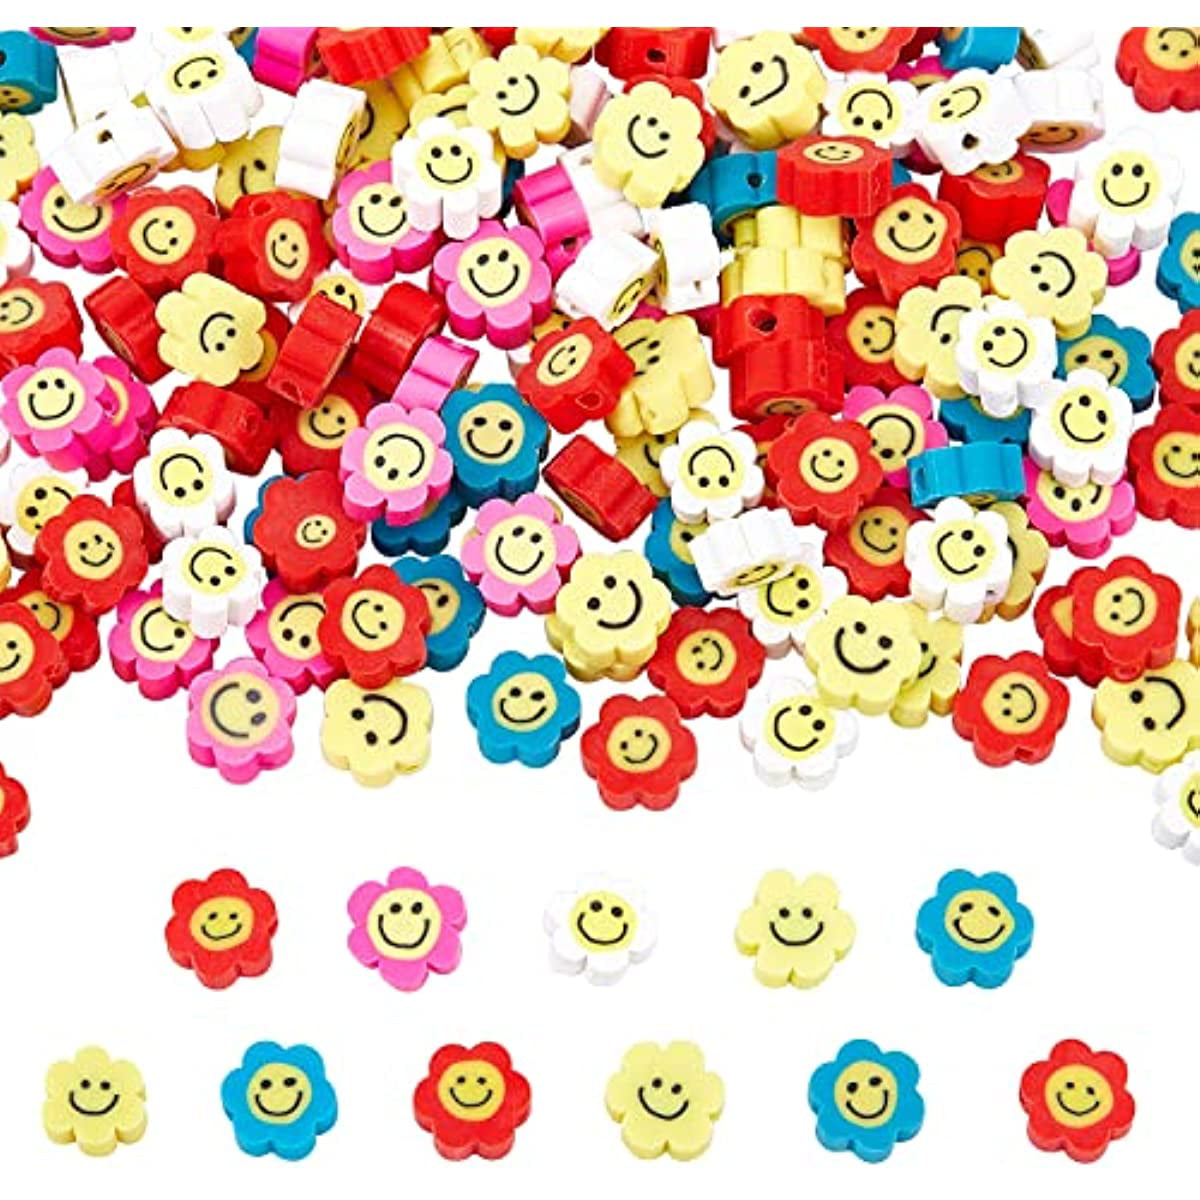 Funtopia Pony Beads for Jewelry Making, 48 Colors Plastic Beads Kit for  Friendship Bracelet Making, Polymer Kandi Beads with Letter Beads for  Necklace, DIY Craft Gift for Kids Girls 